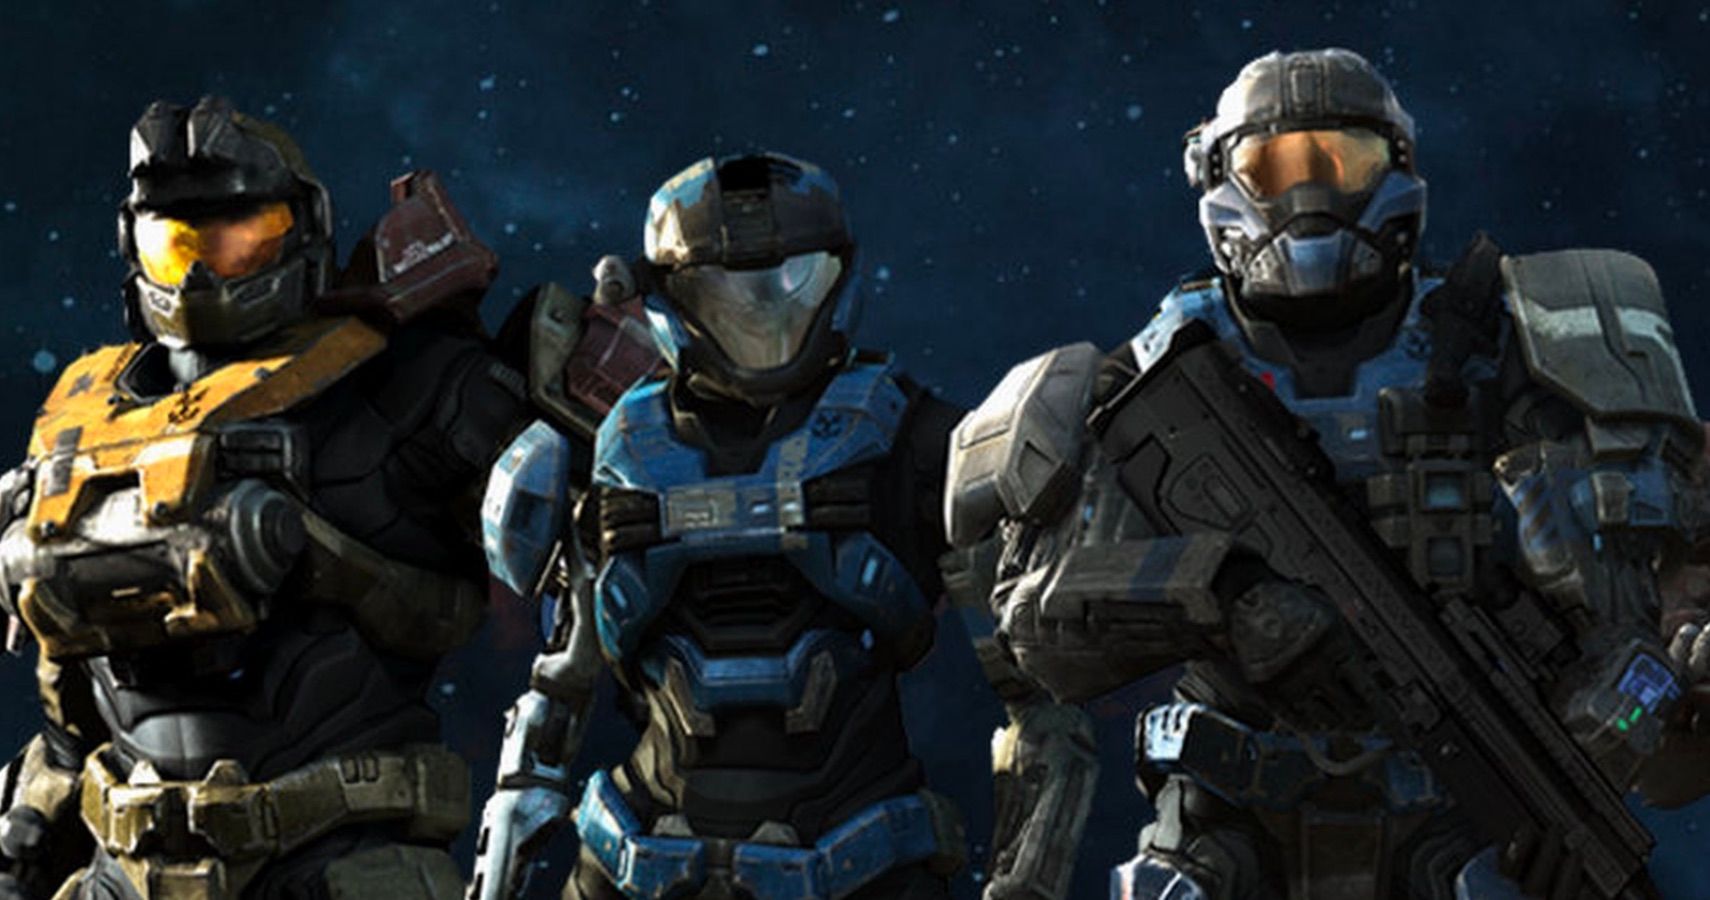 when can i download halo reach on pc